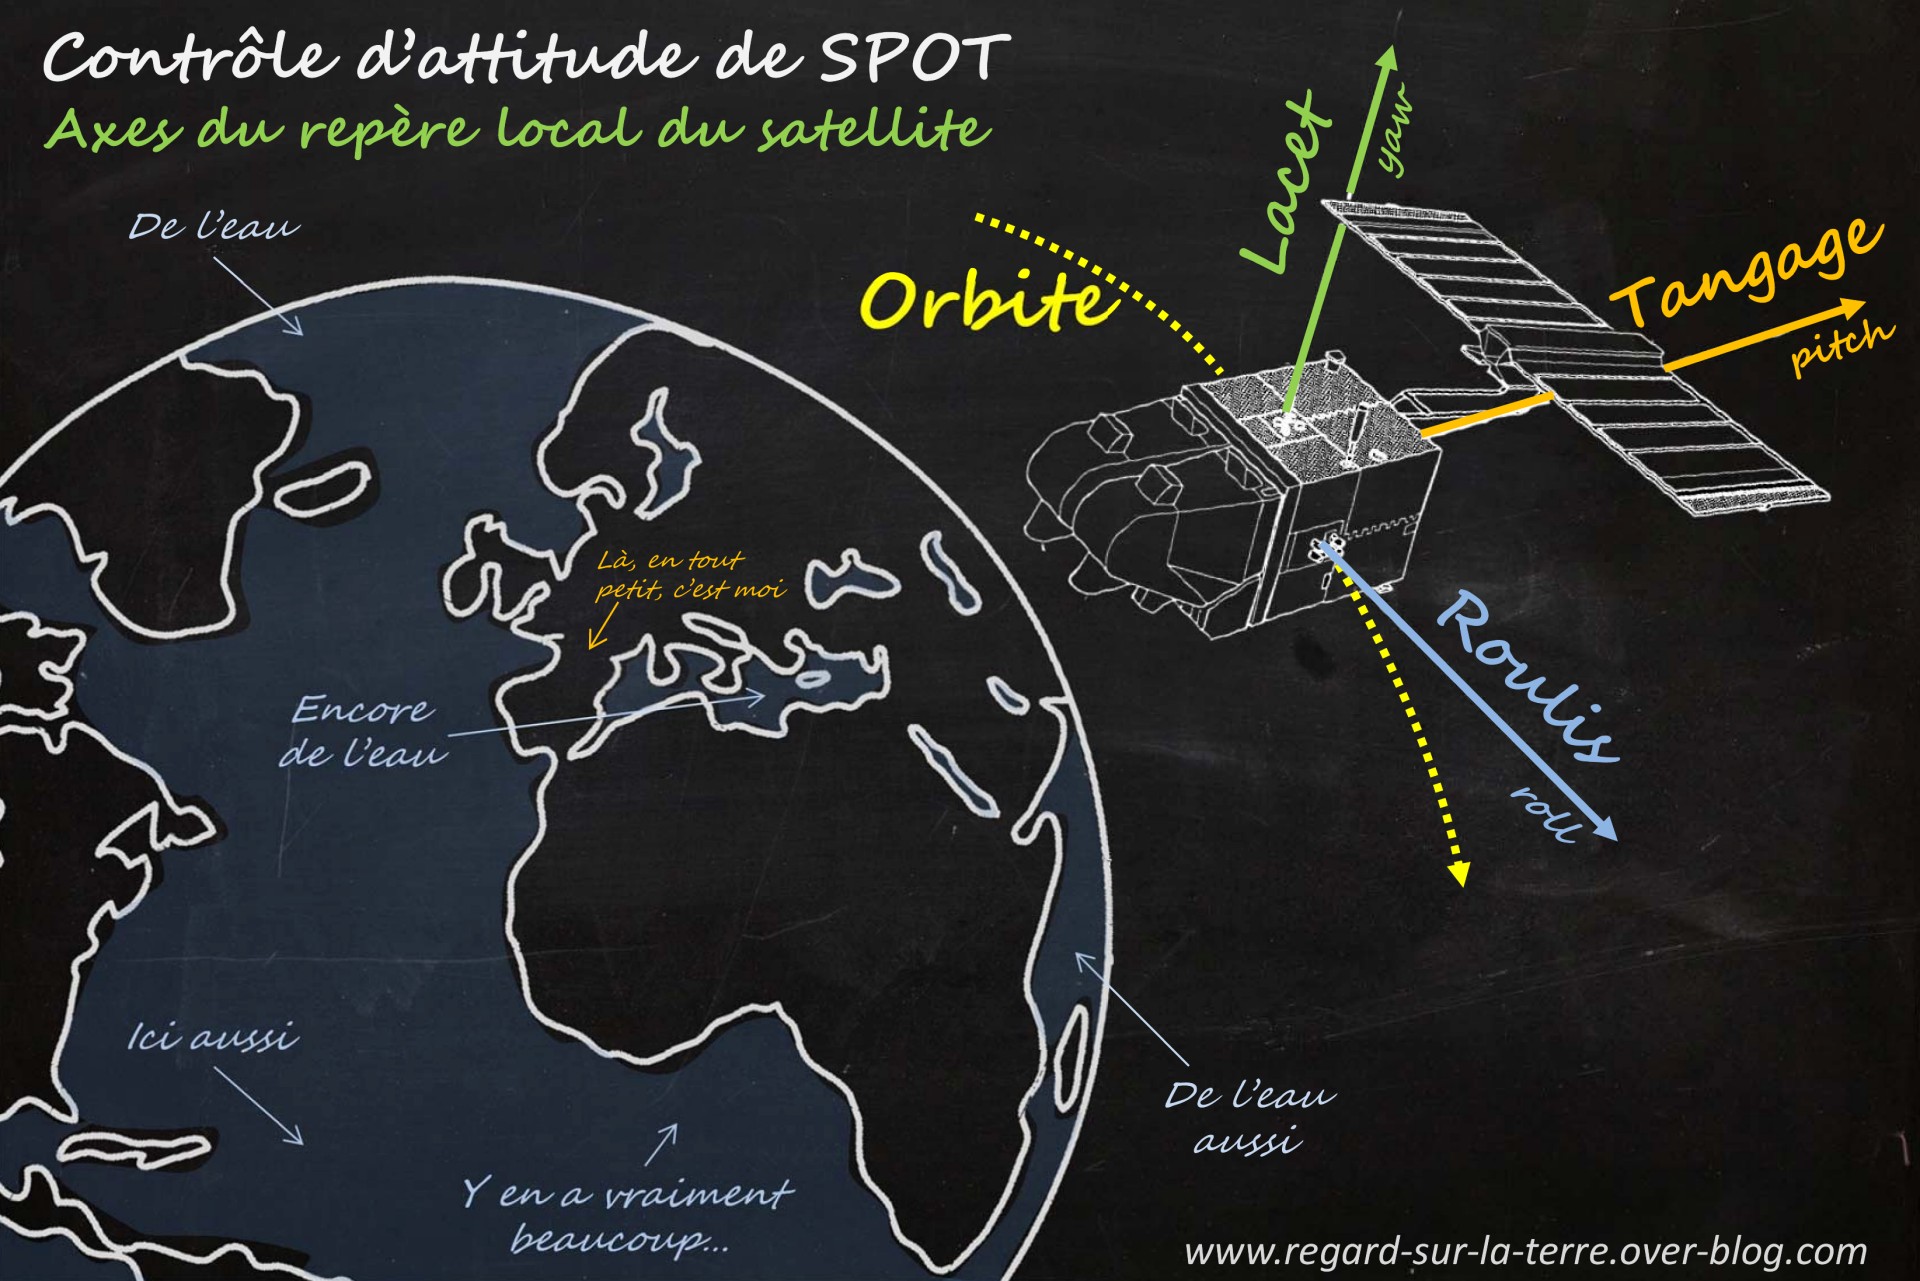 Satellite - Orbite - Repère local - Roulis - Tangage - Lacet - Roll - Pitch - Yaw